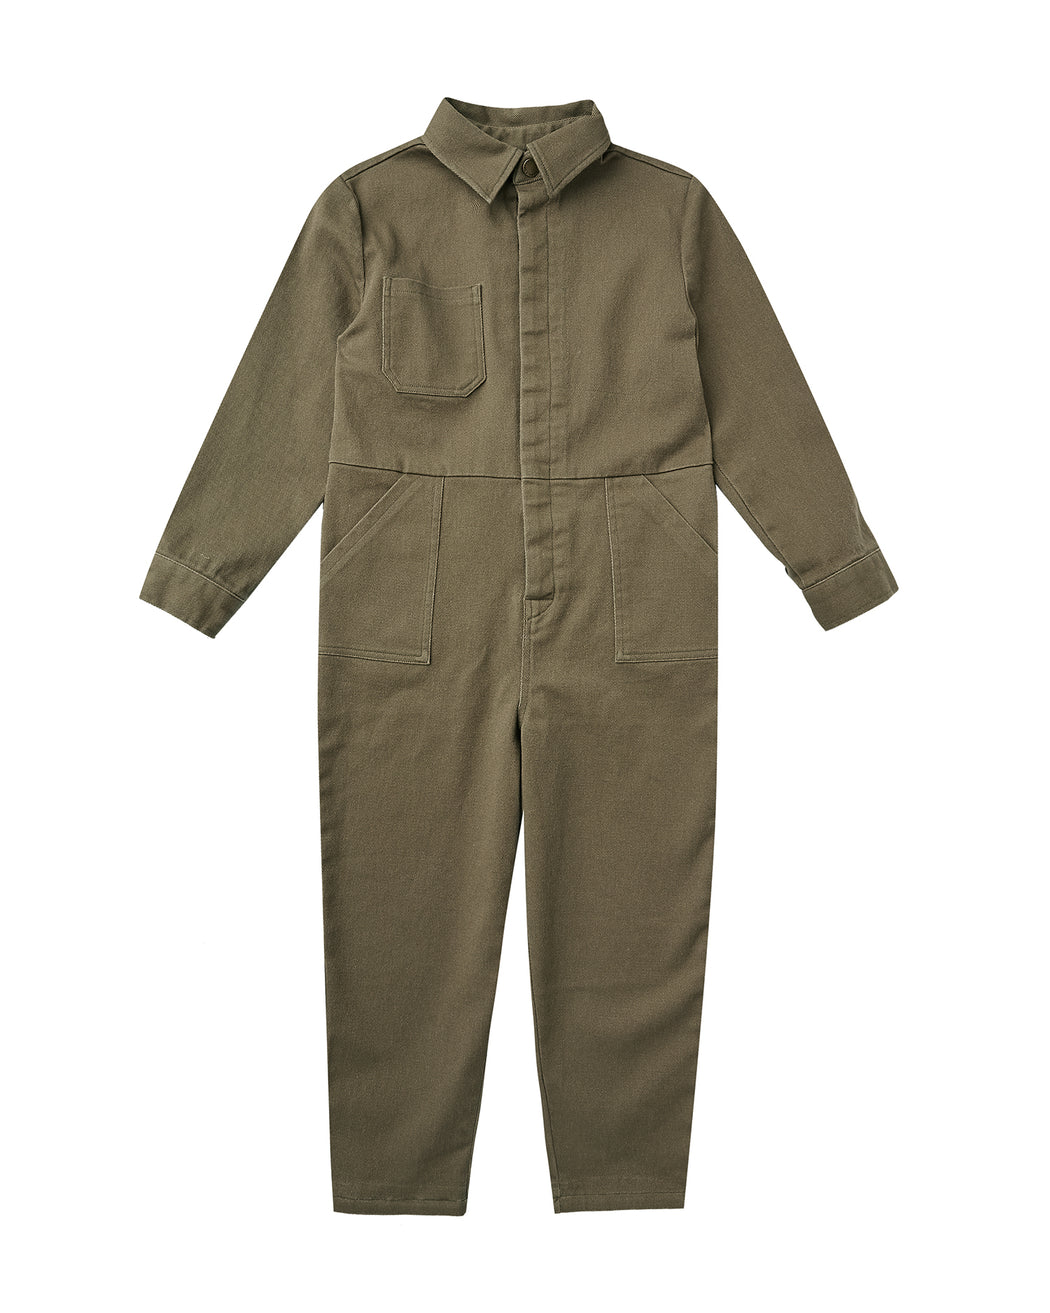 Coverall Jumpsuit – Olive